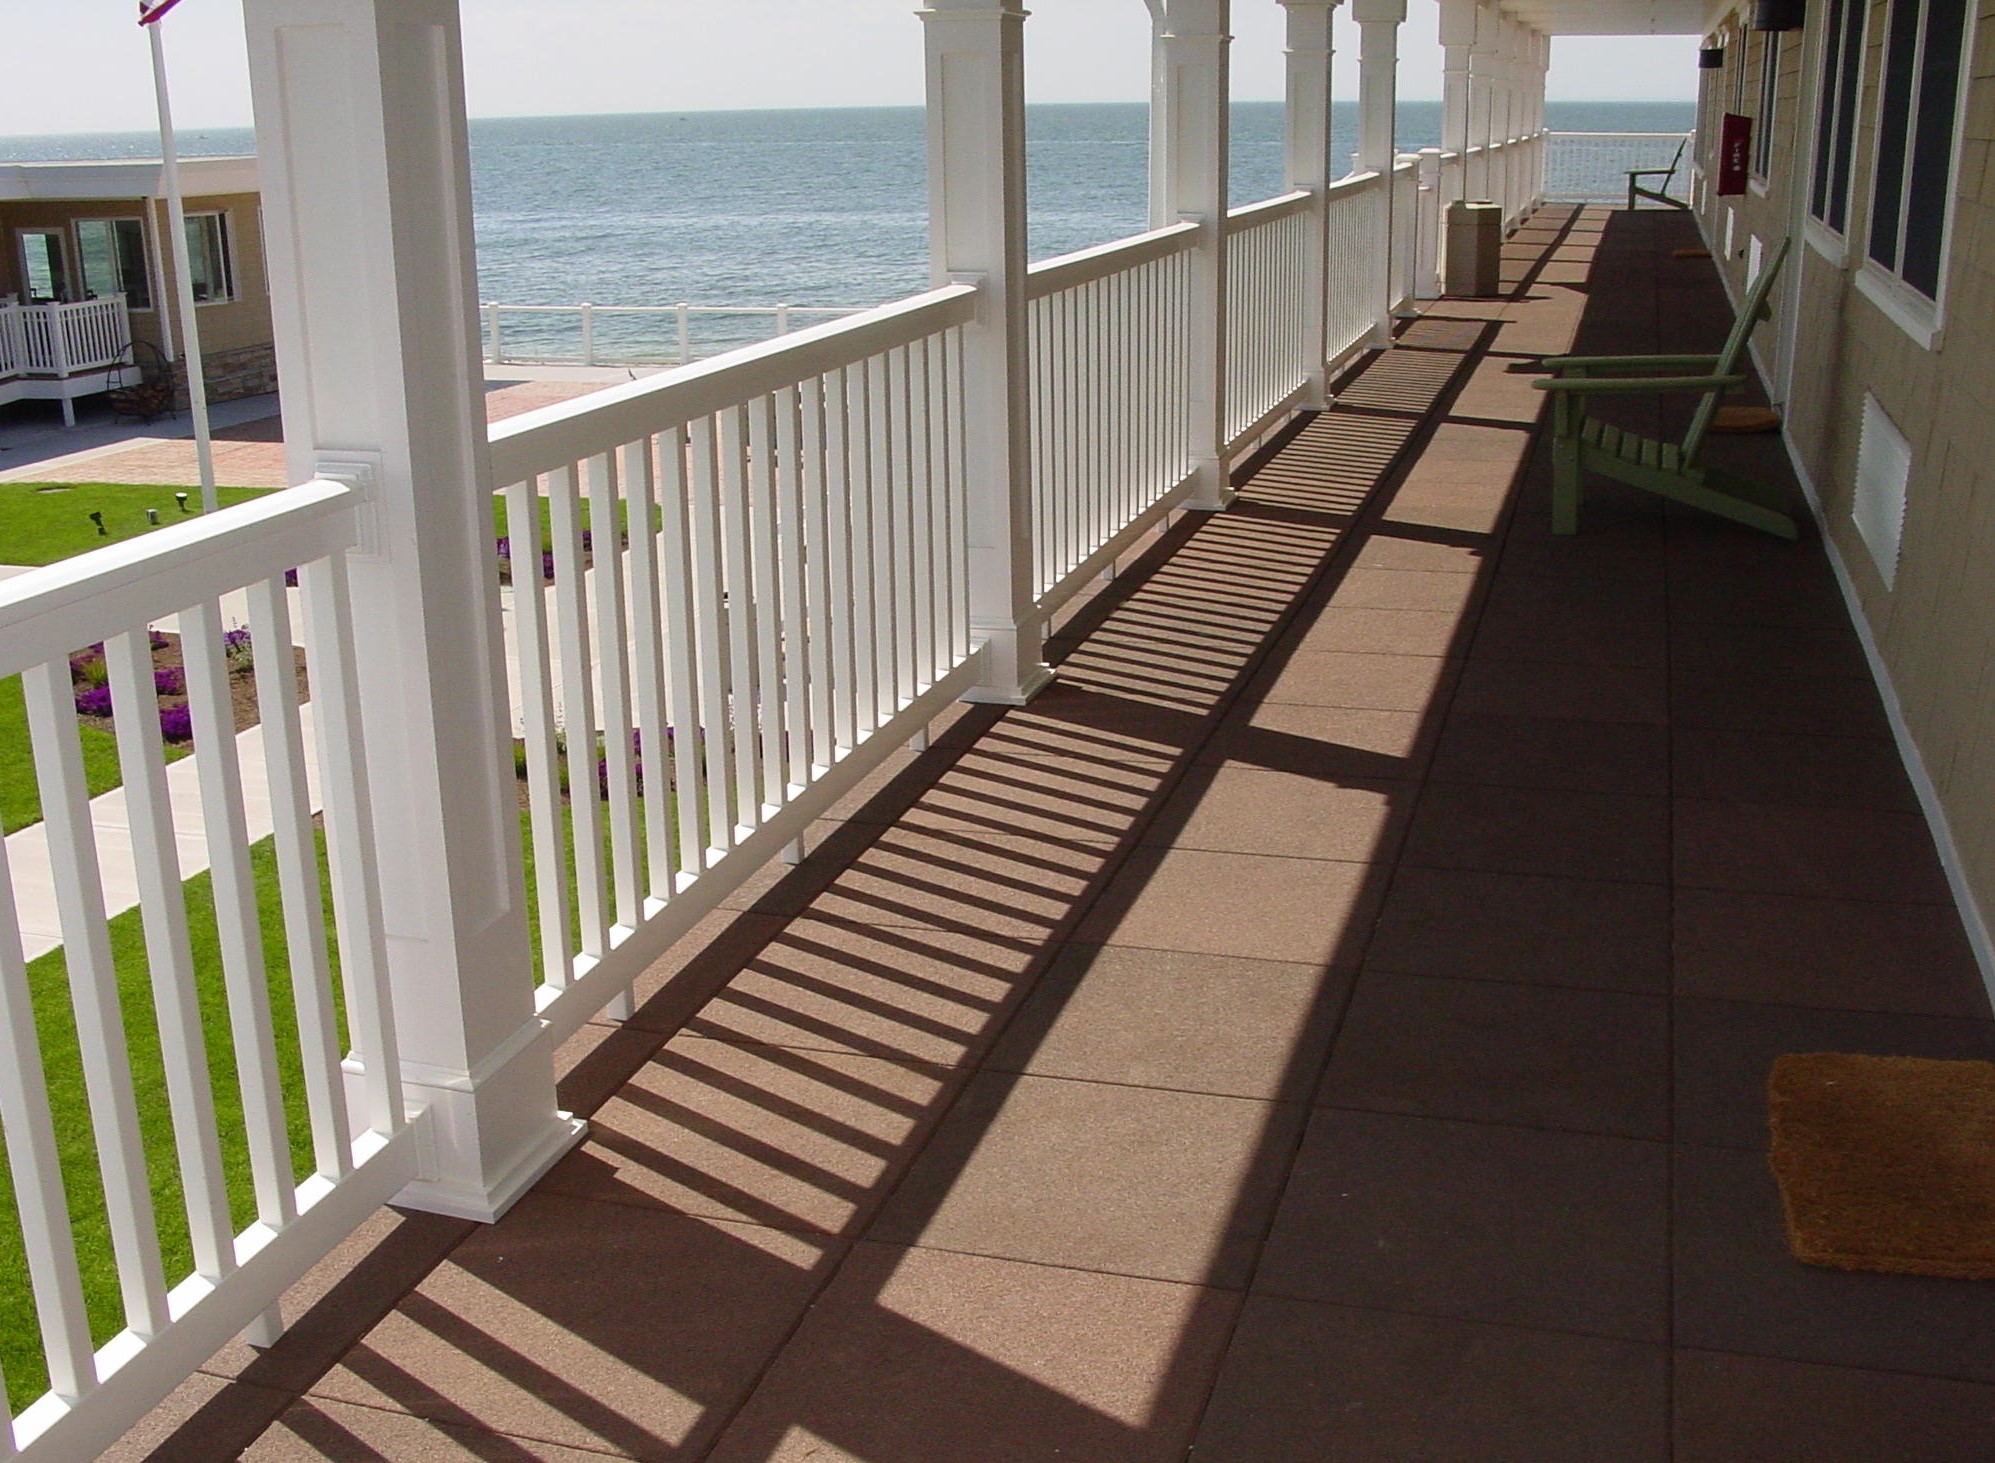 Walkway Tile System Leading To The Ocean b